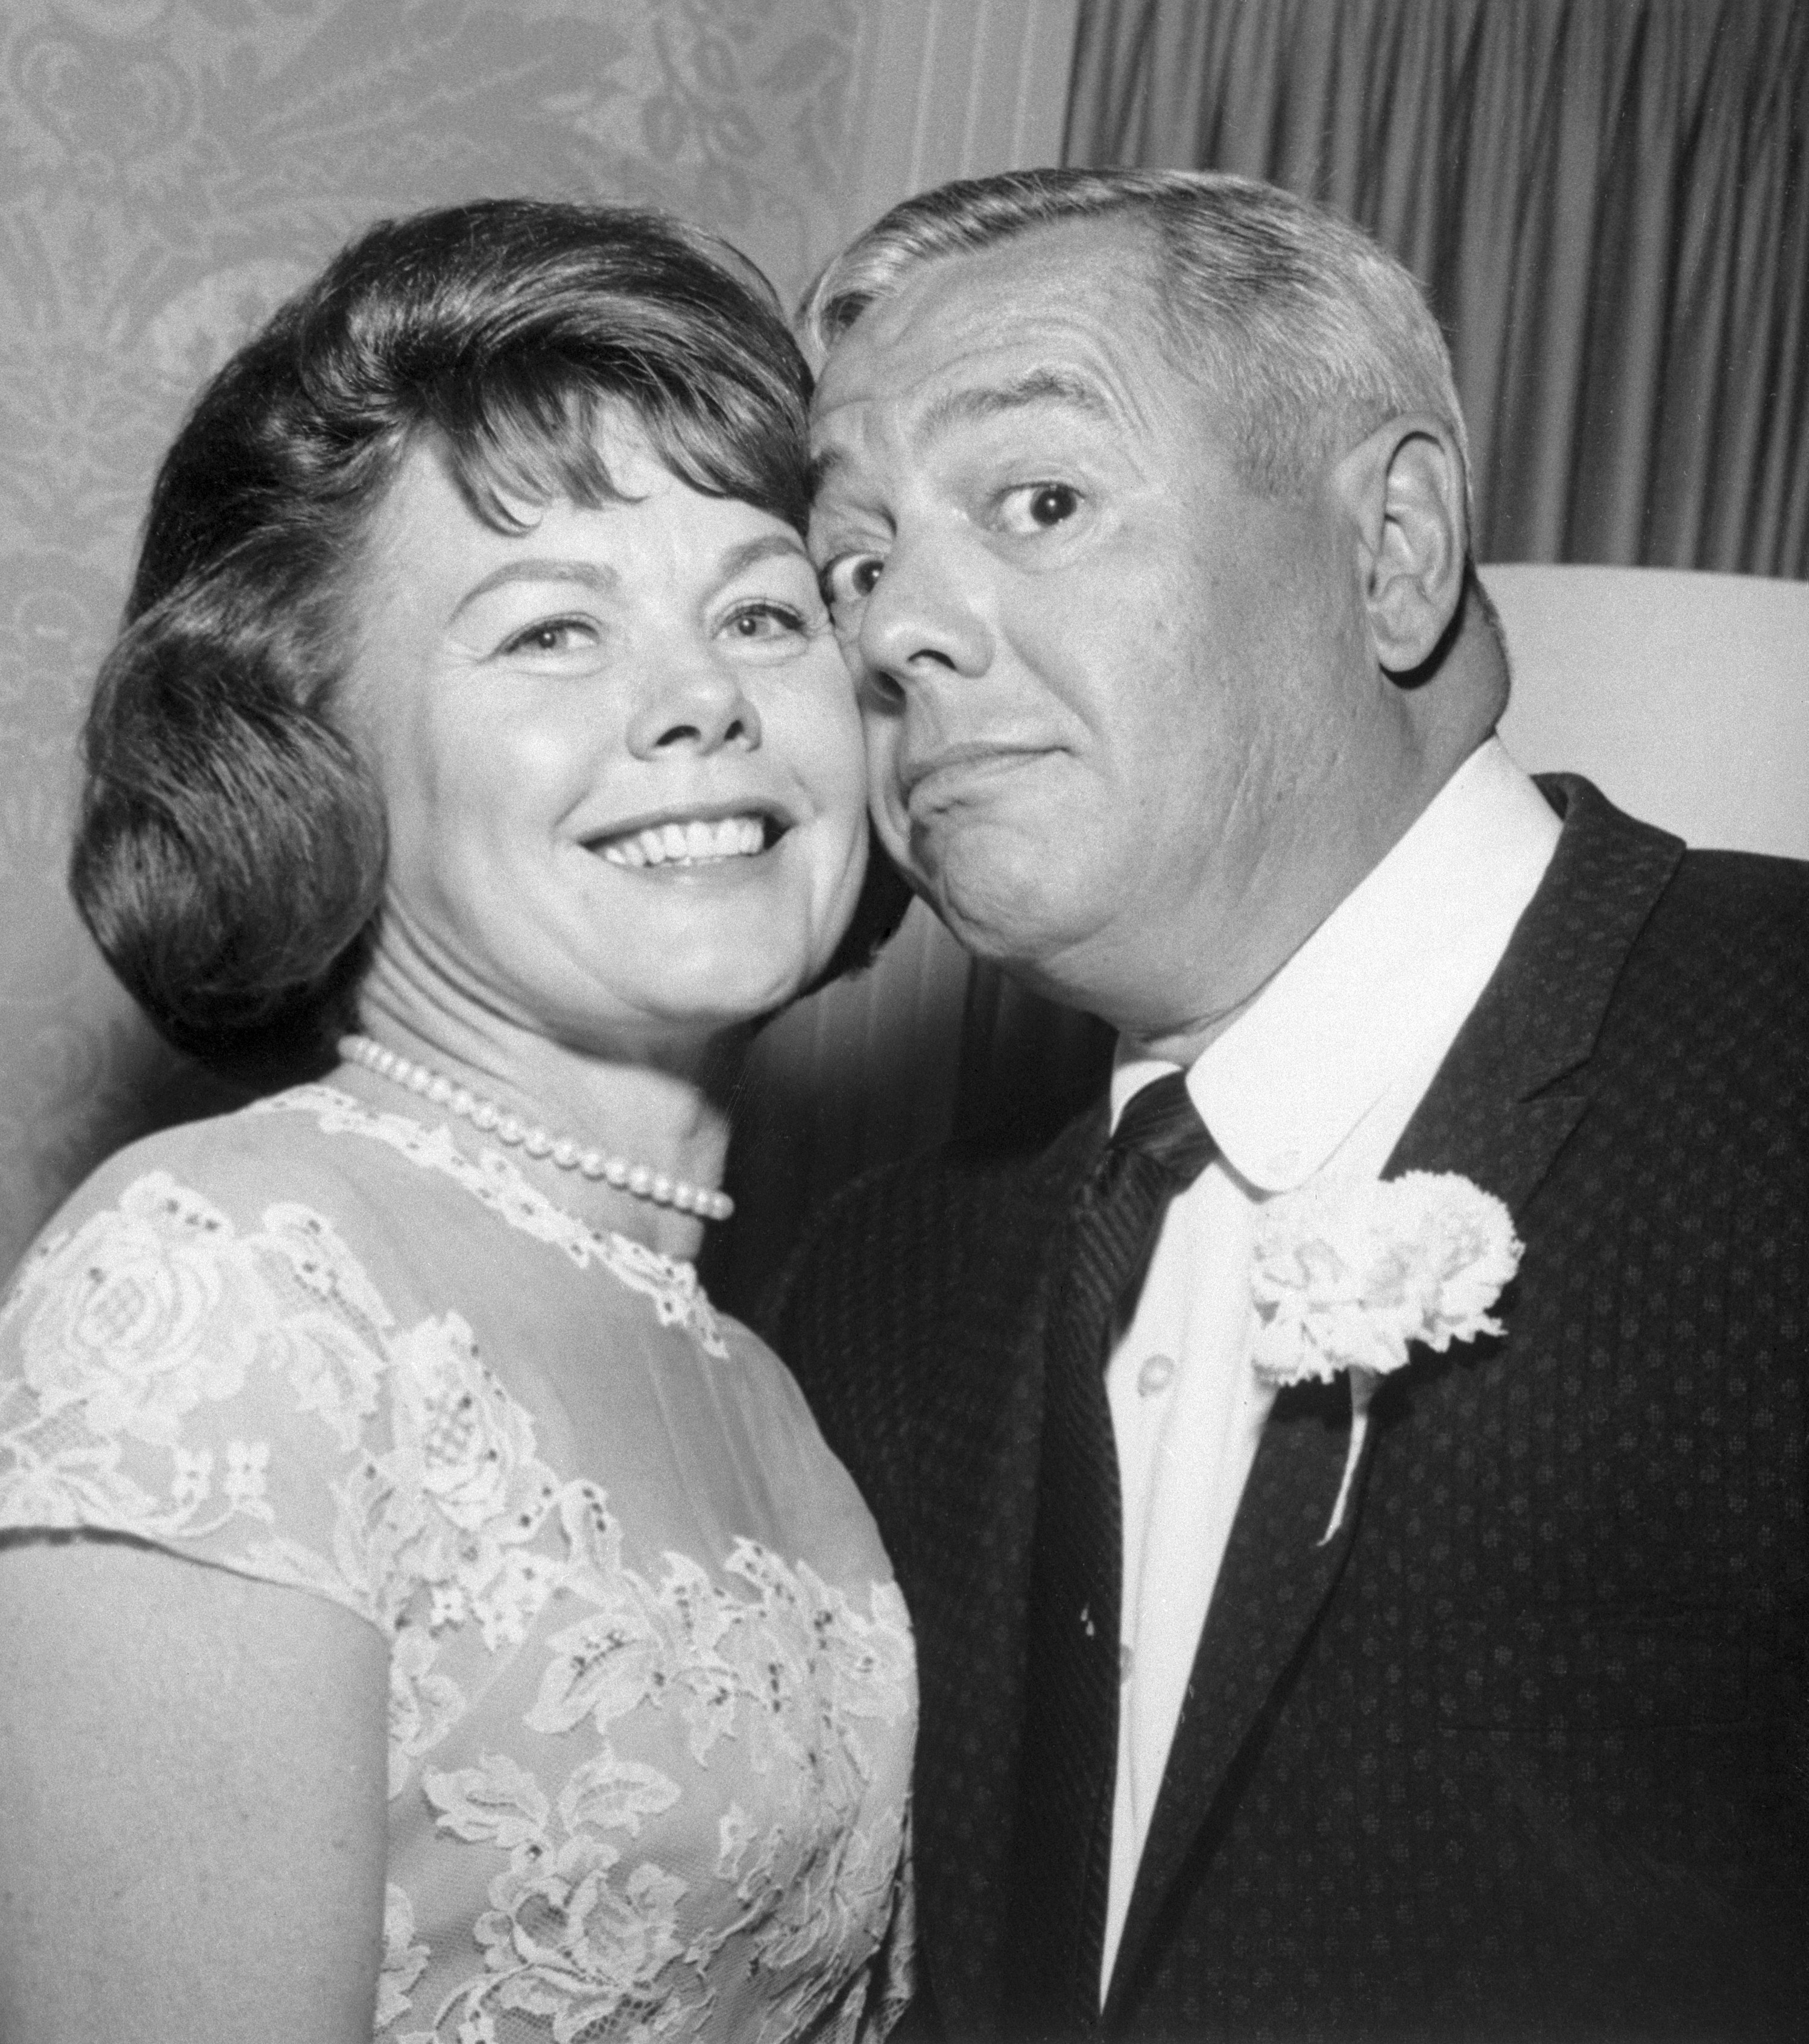 Desi Arnaz and Edith Mack Hirsch pose at their wedding, which took place at the Sands Hotel